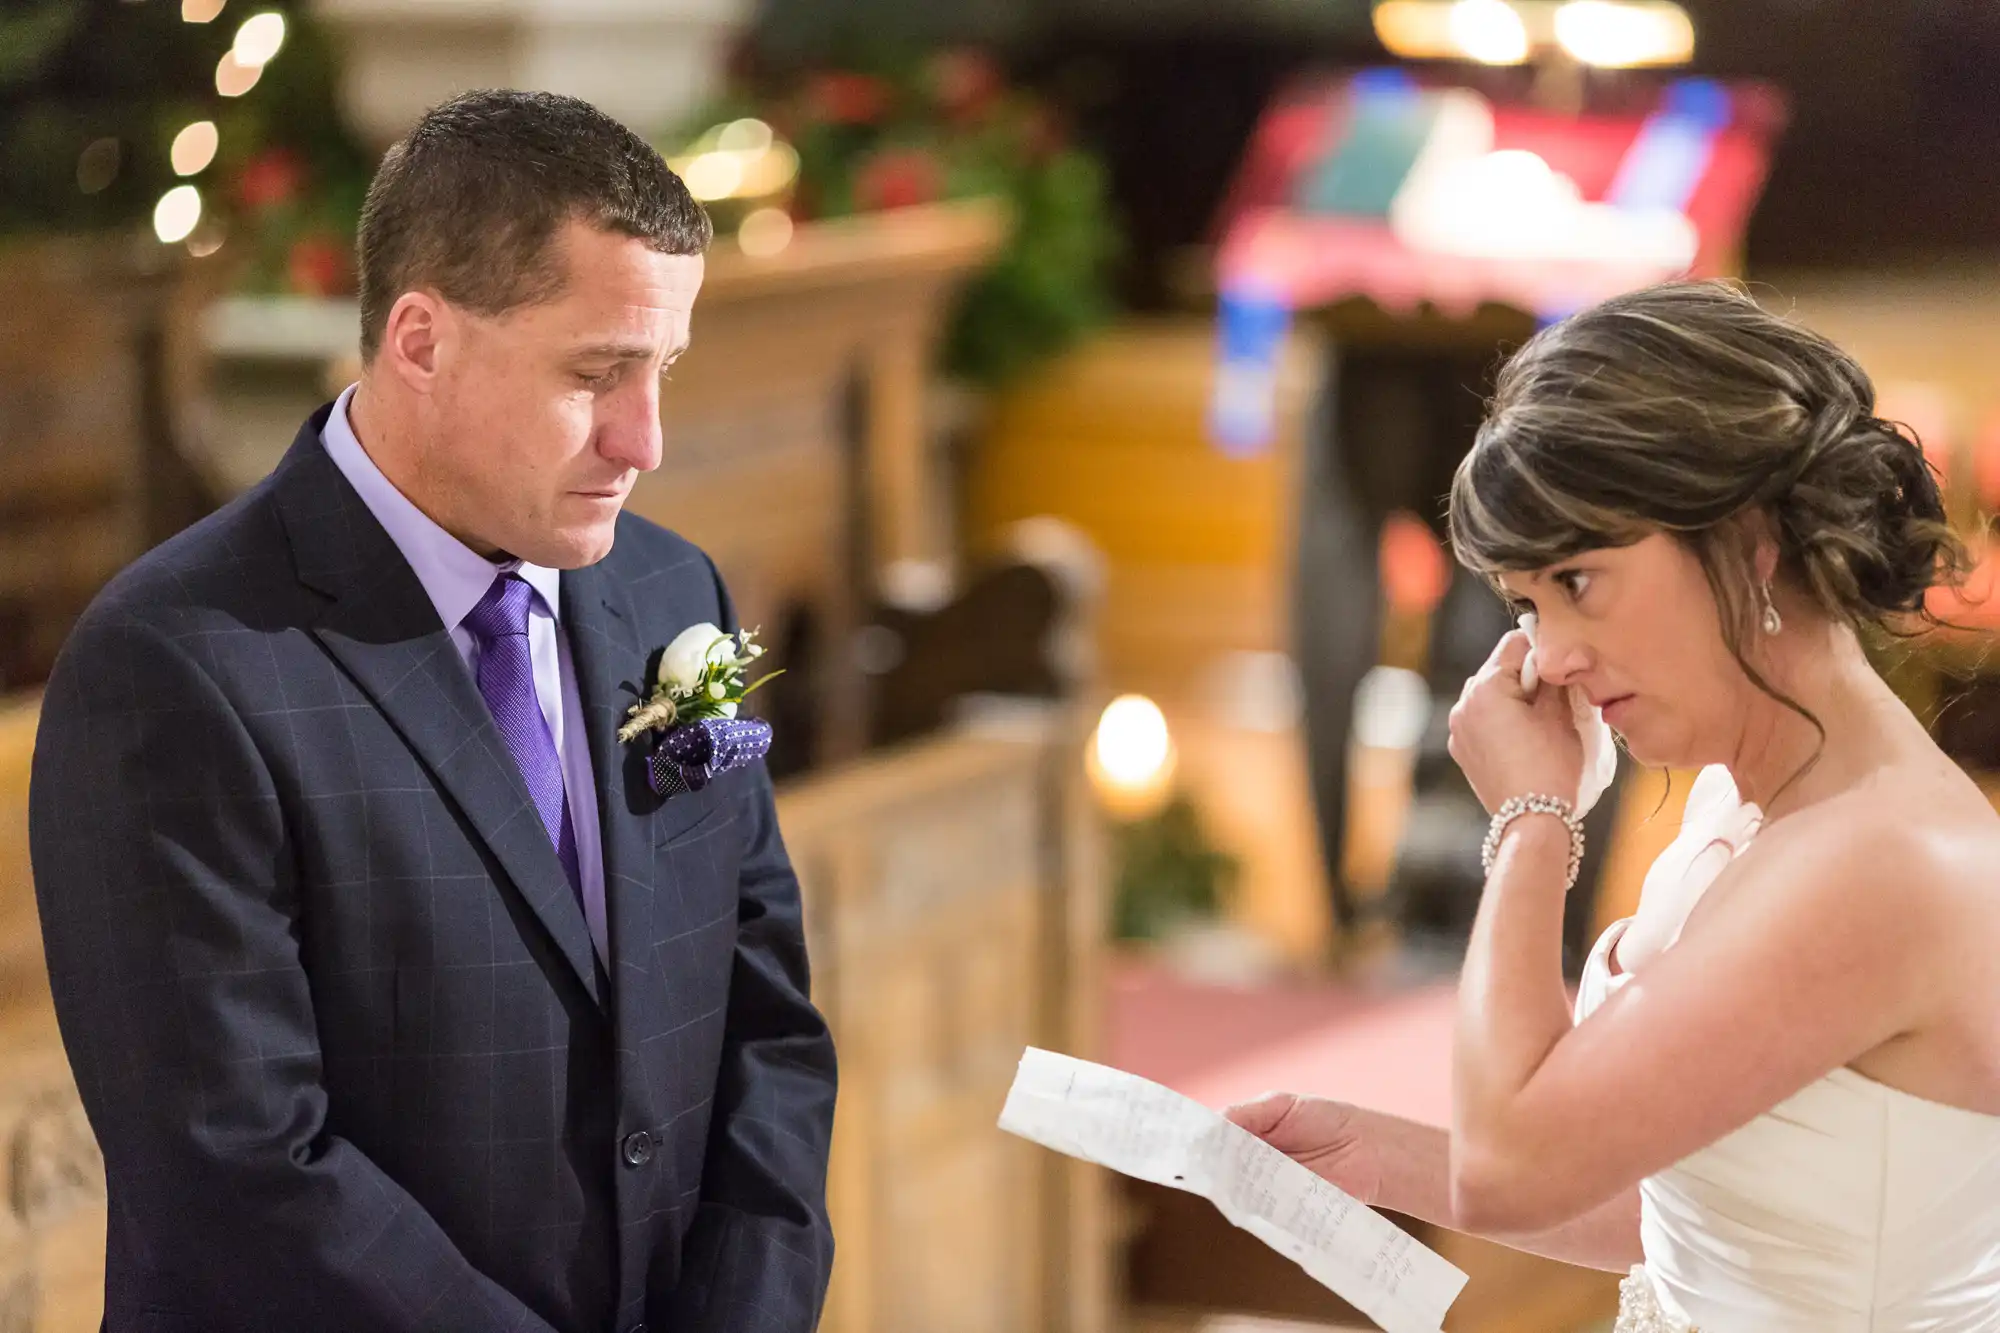 A bride and groom emotionally exchanging vows in a church, the groom looking tearful while the bride reads from a paper.